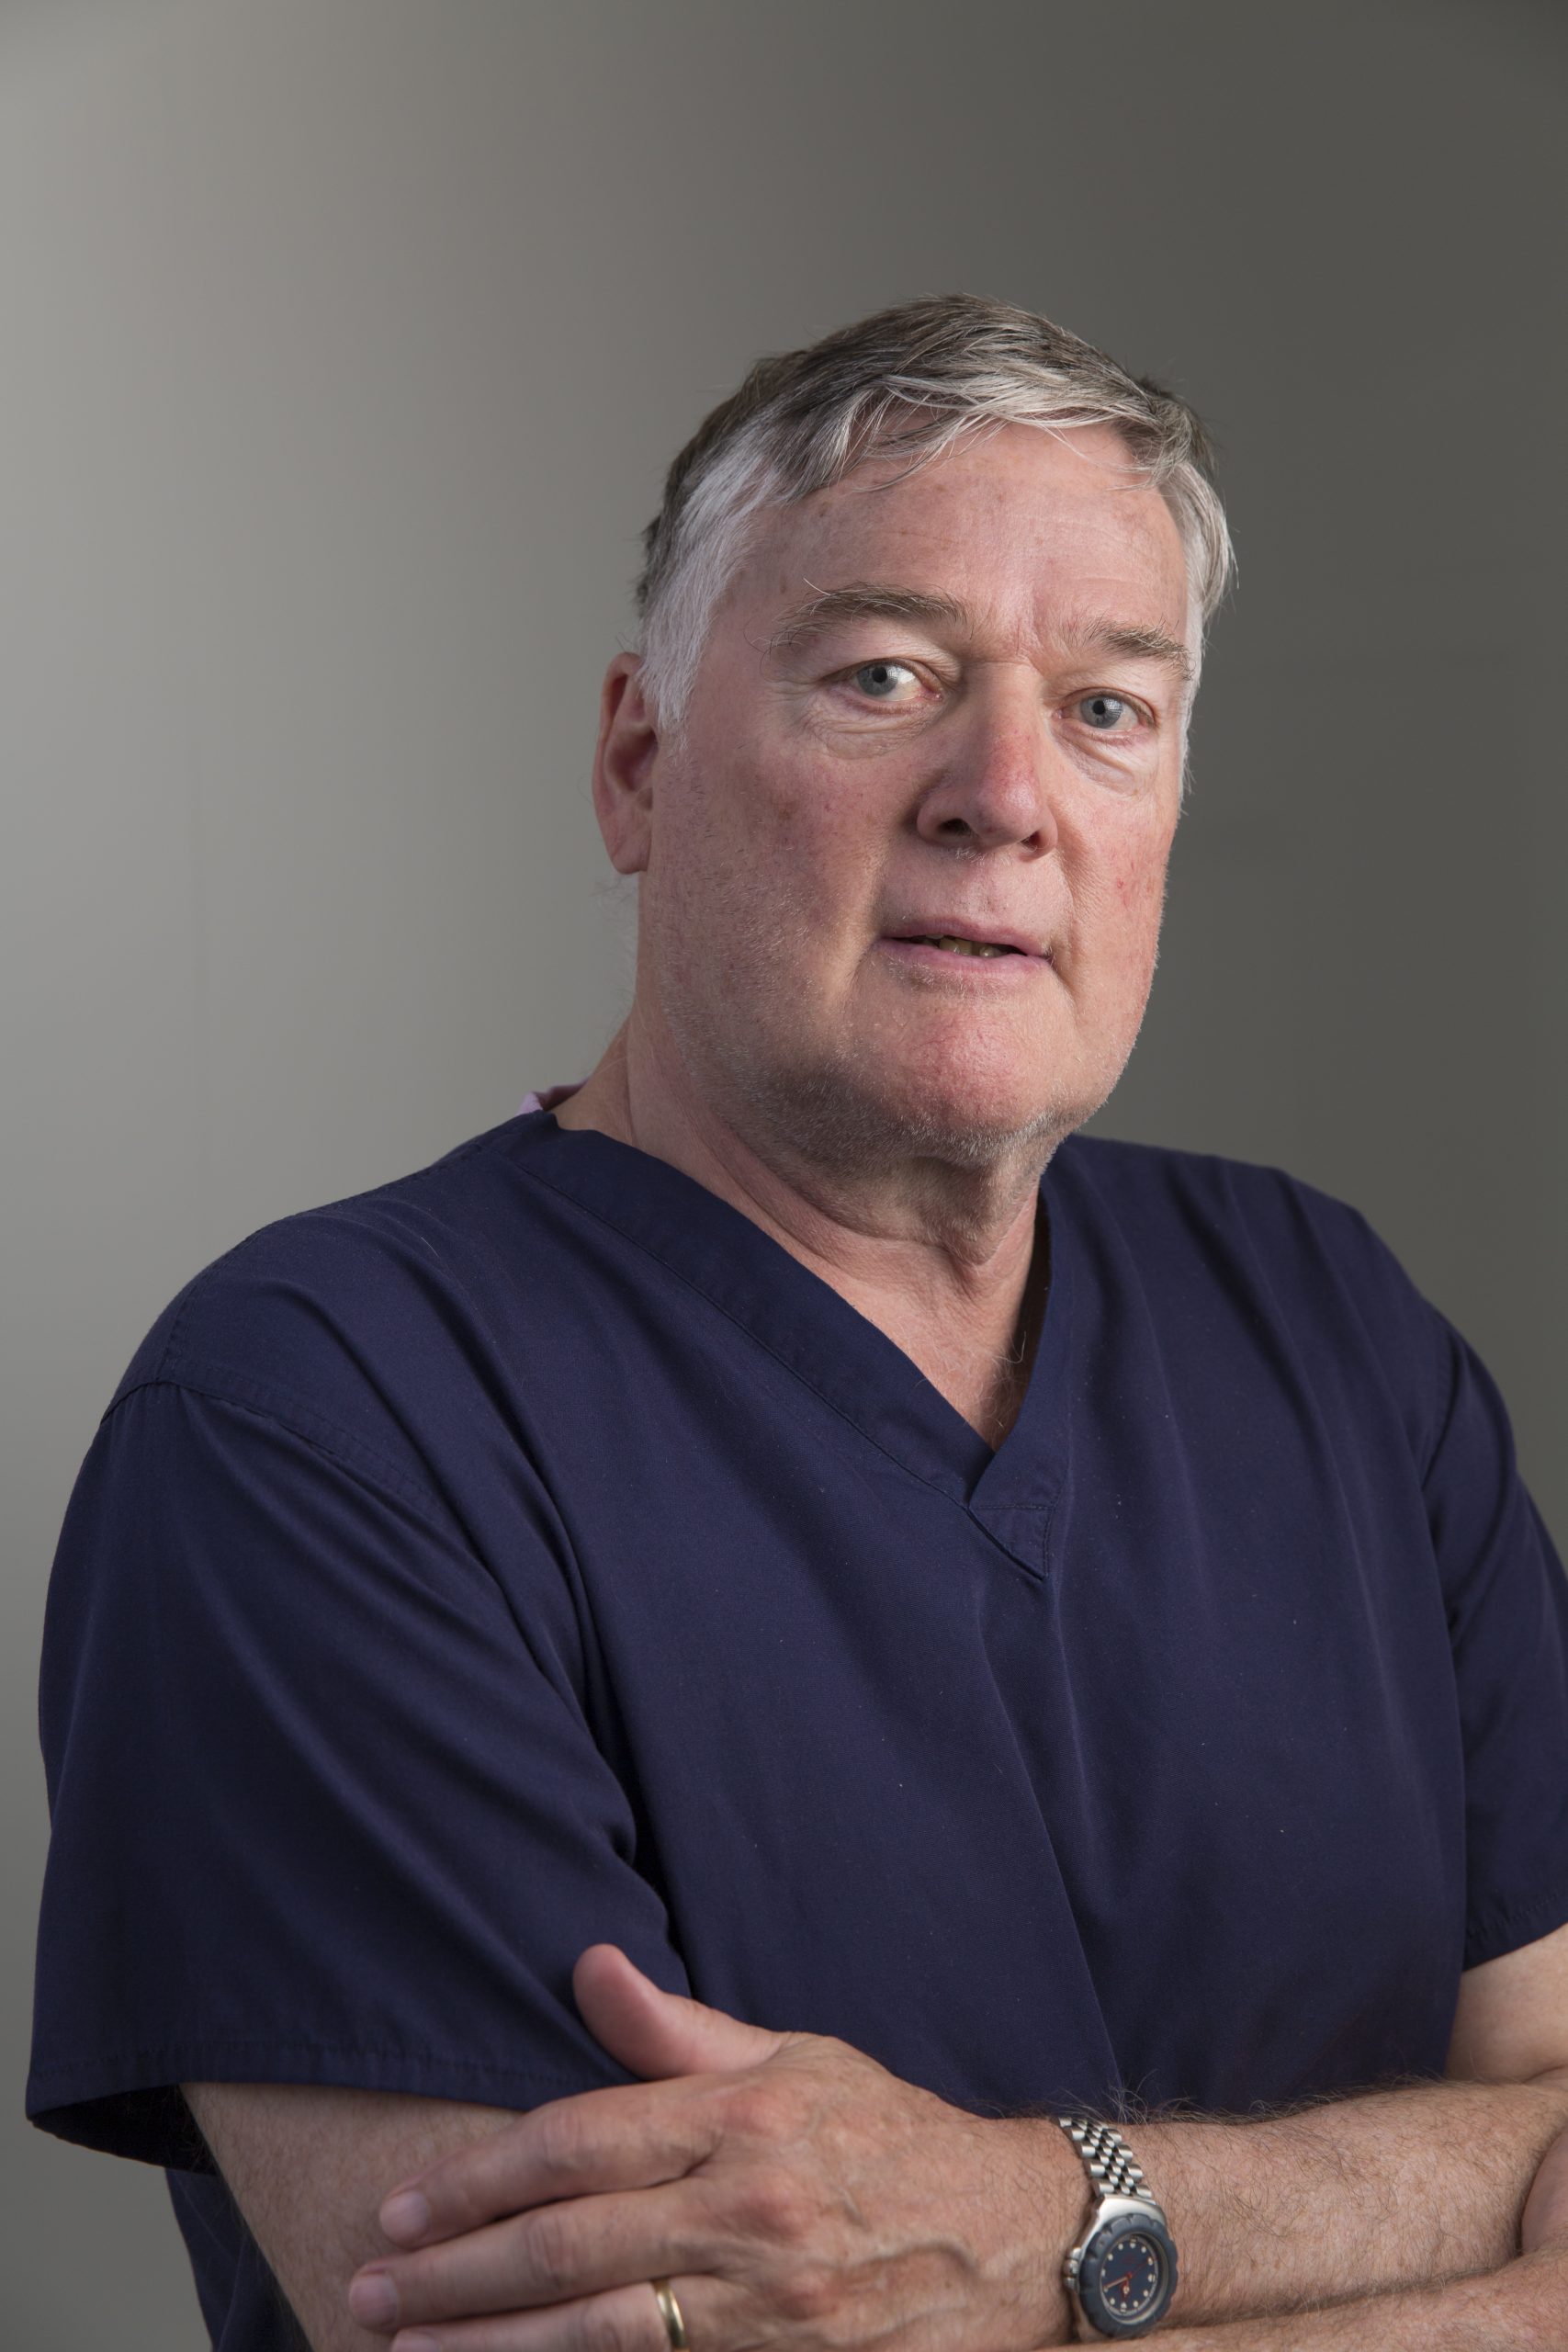 Dr. Michael May of the Wimpole Clinic